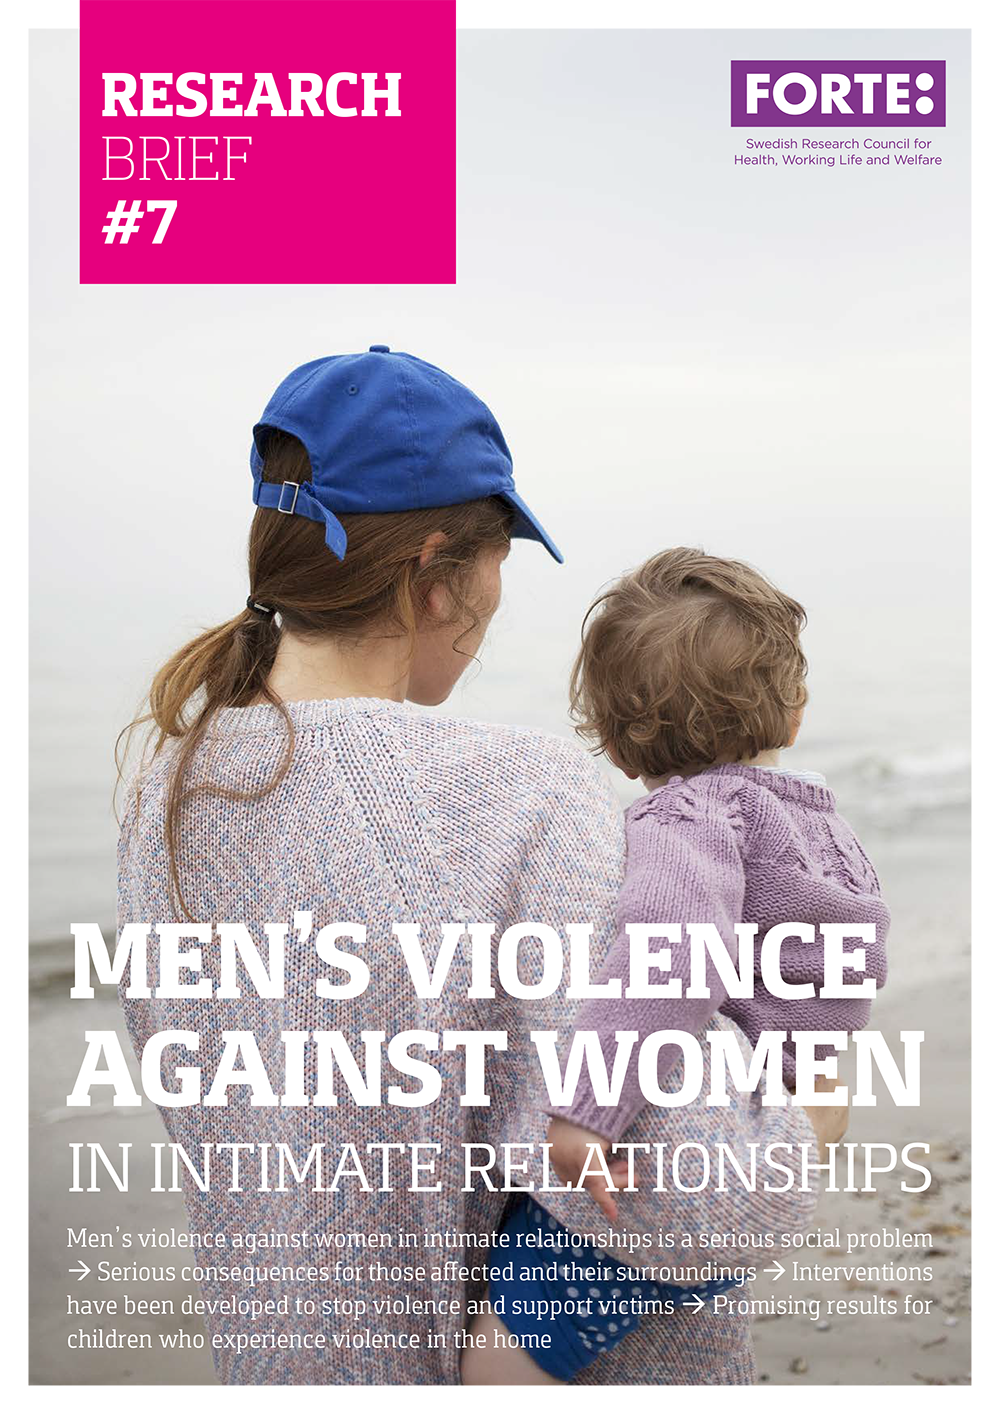 Research brief: Men’s violence against women in intimate relationships